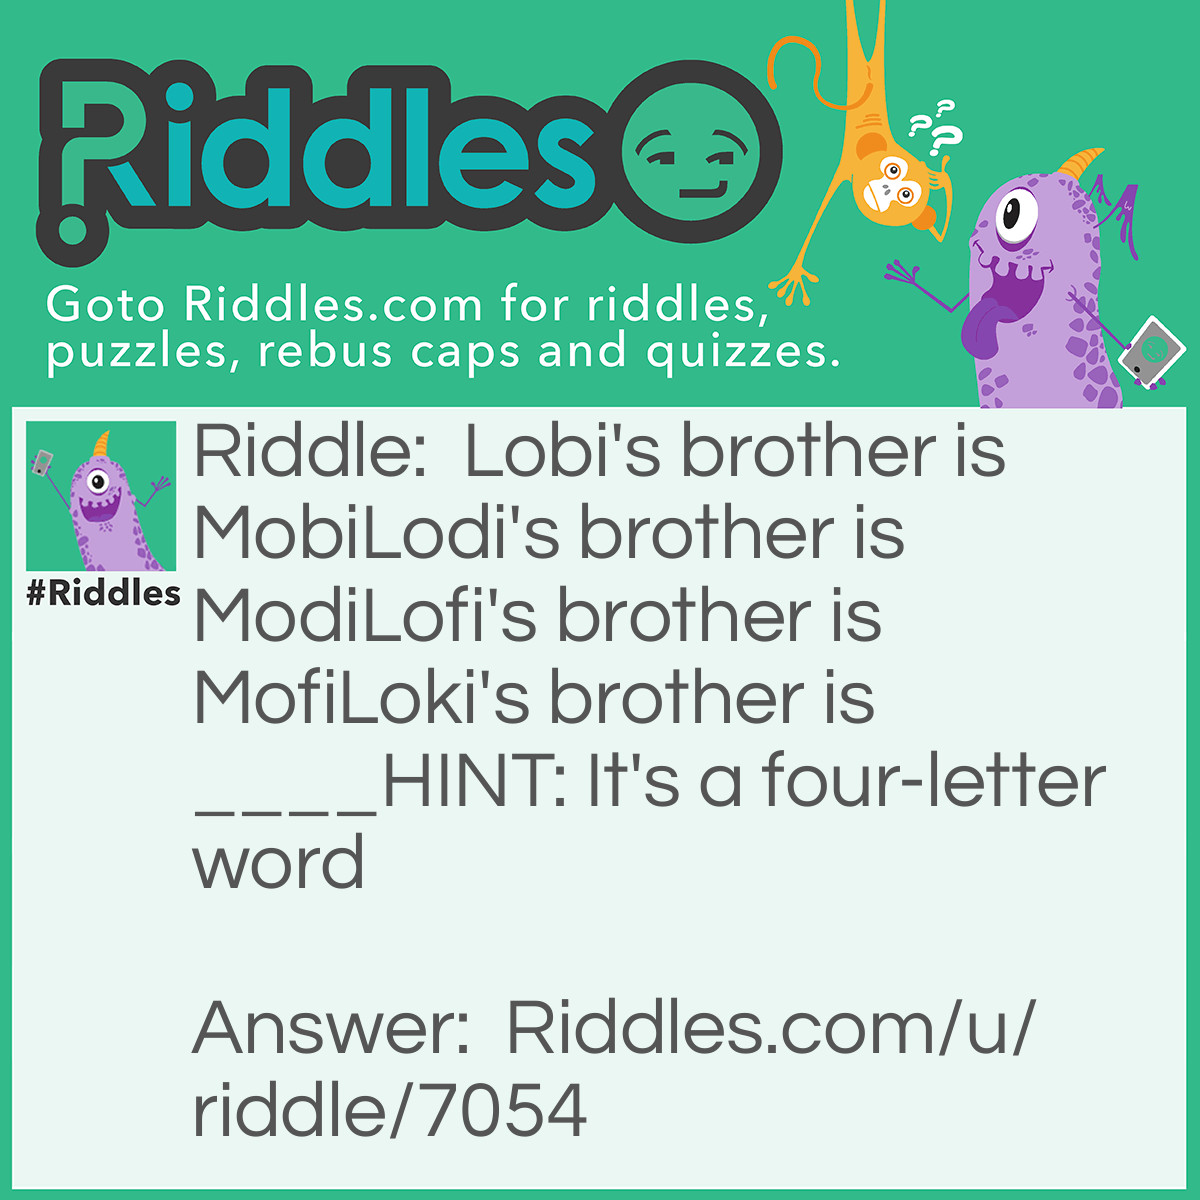 Riddle: Lobi's brother is MobiLodi's brother is ModiLofi's brother is MofiLoki's brother is ____HINT: It's a four-letter word Answer: Thor.